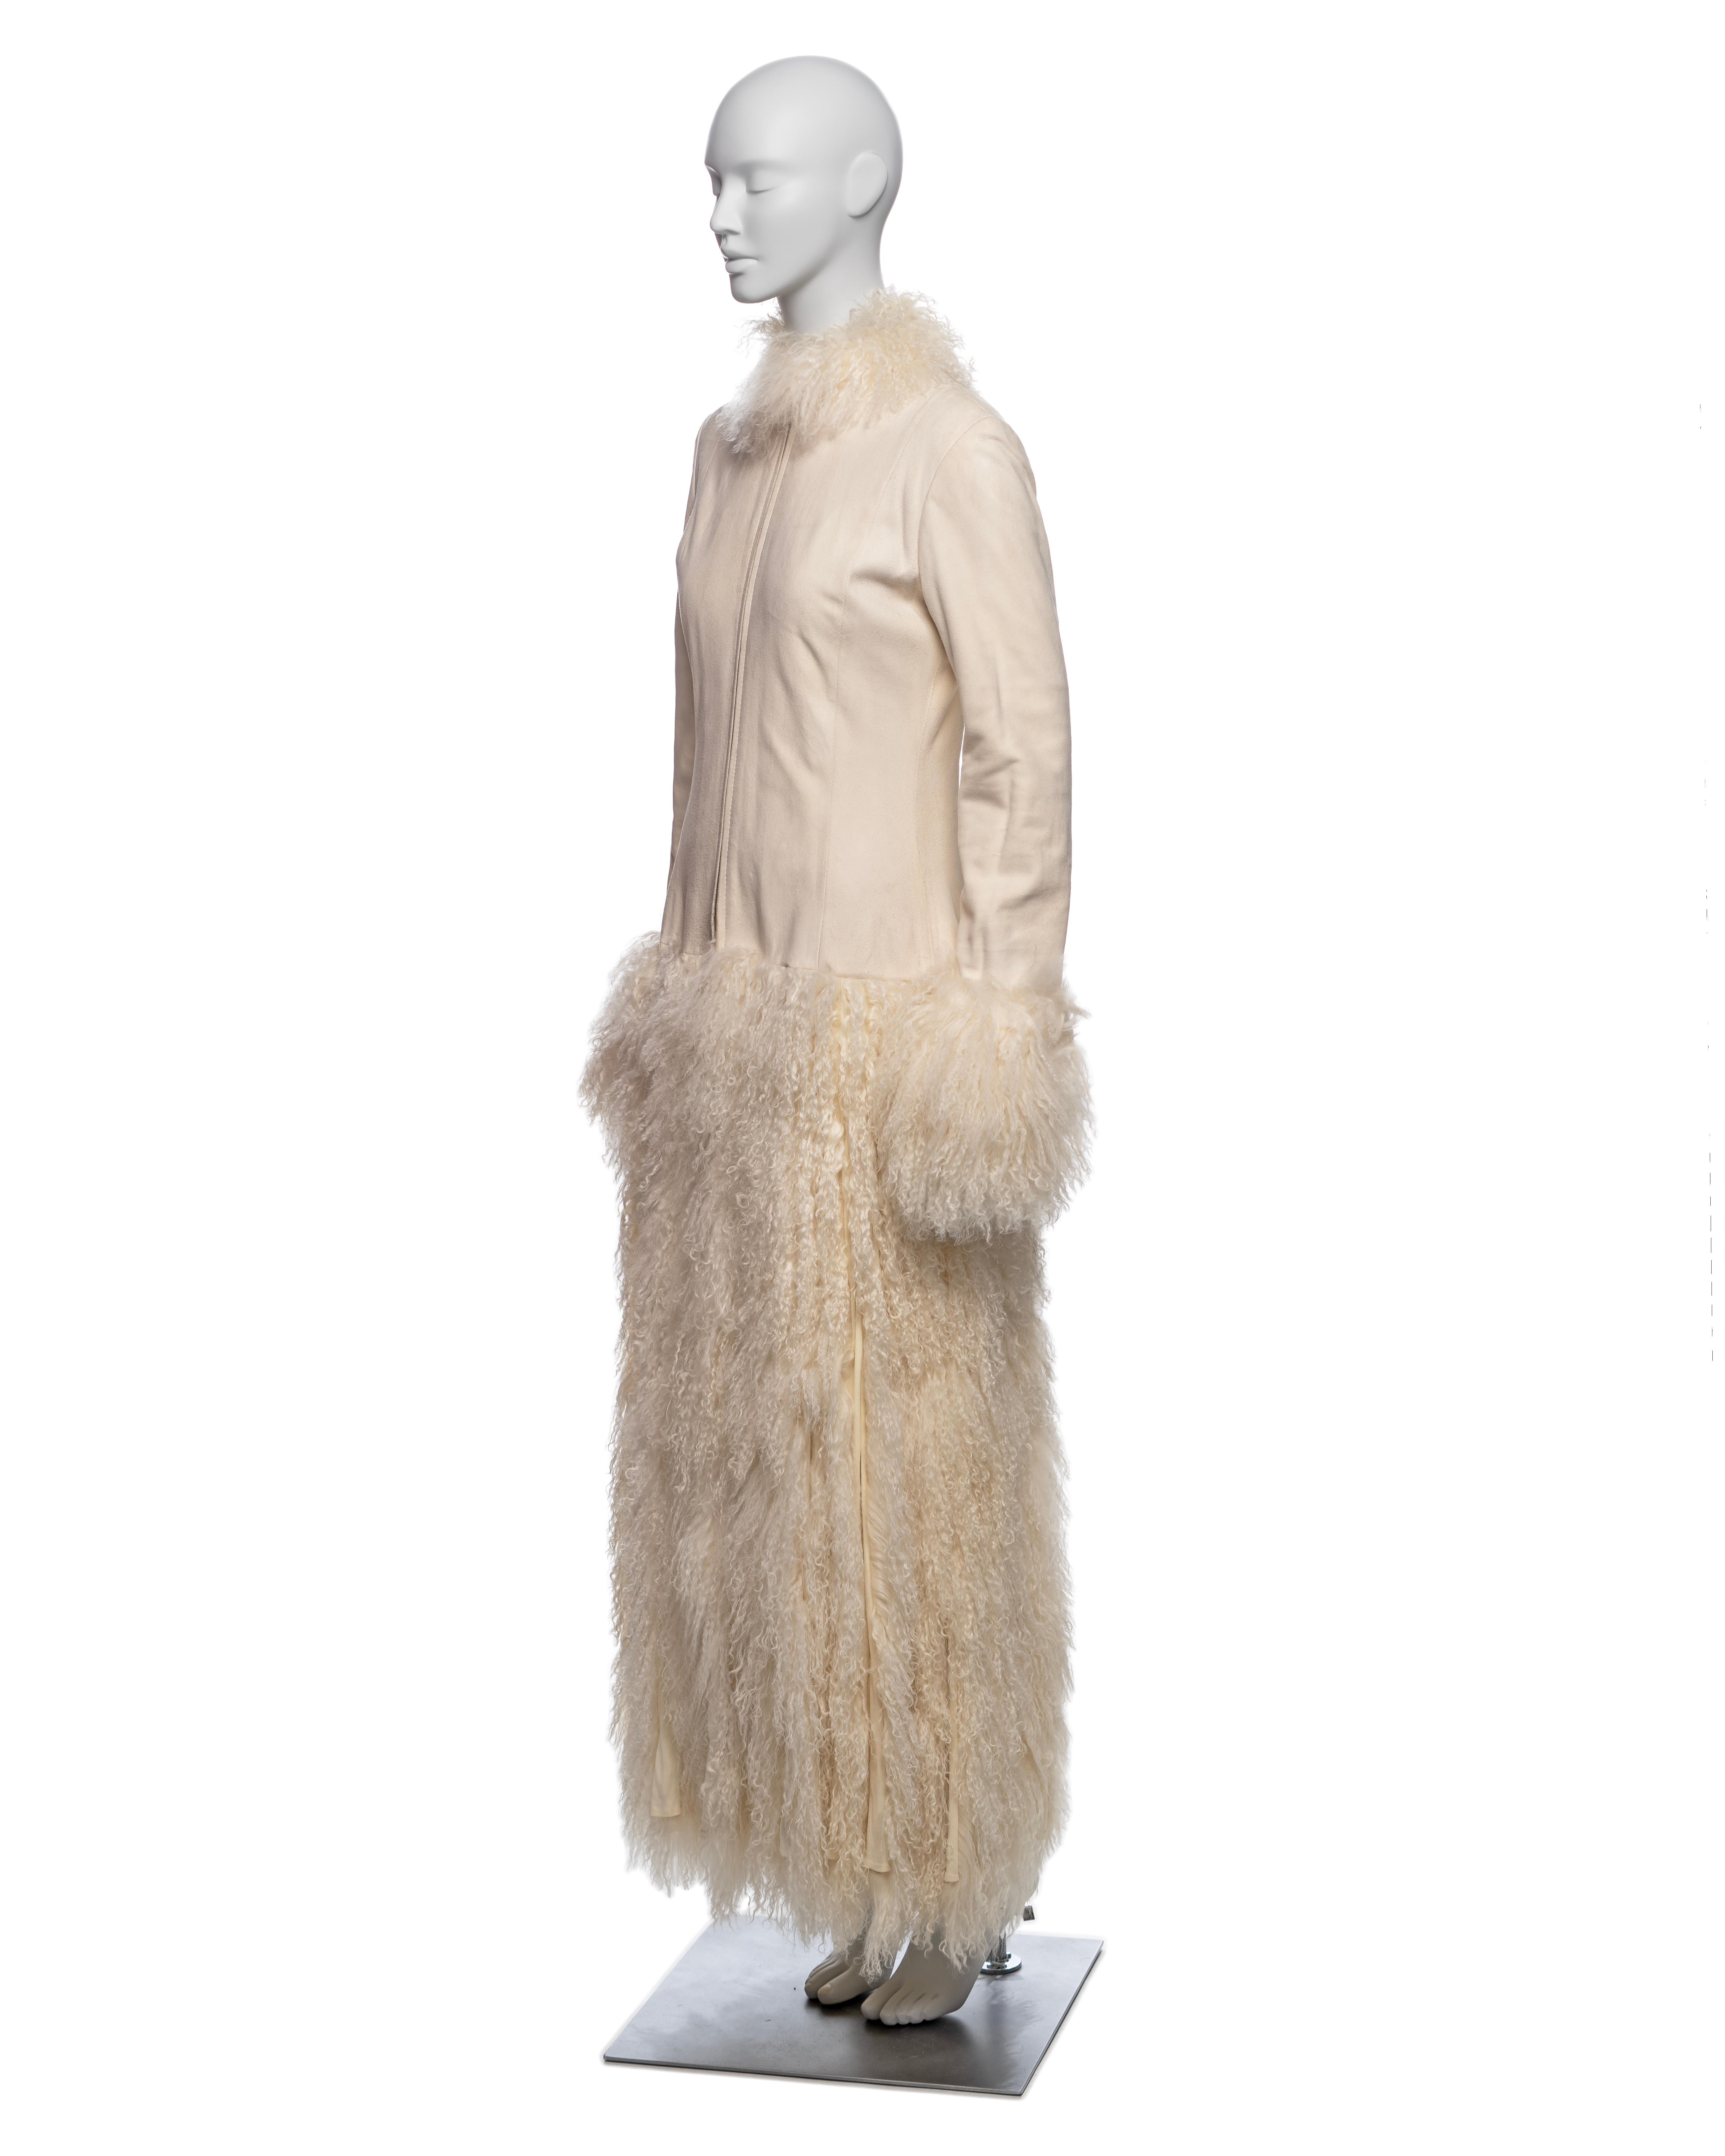 Jean Paul Gaultier White Mongolian Lamb Fur and Leather Coat Dress, FW 2006 For Sale 11